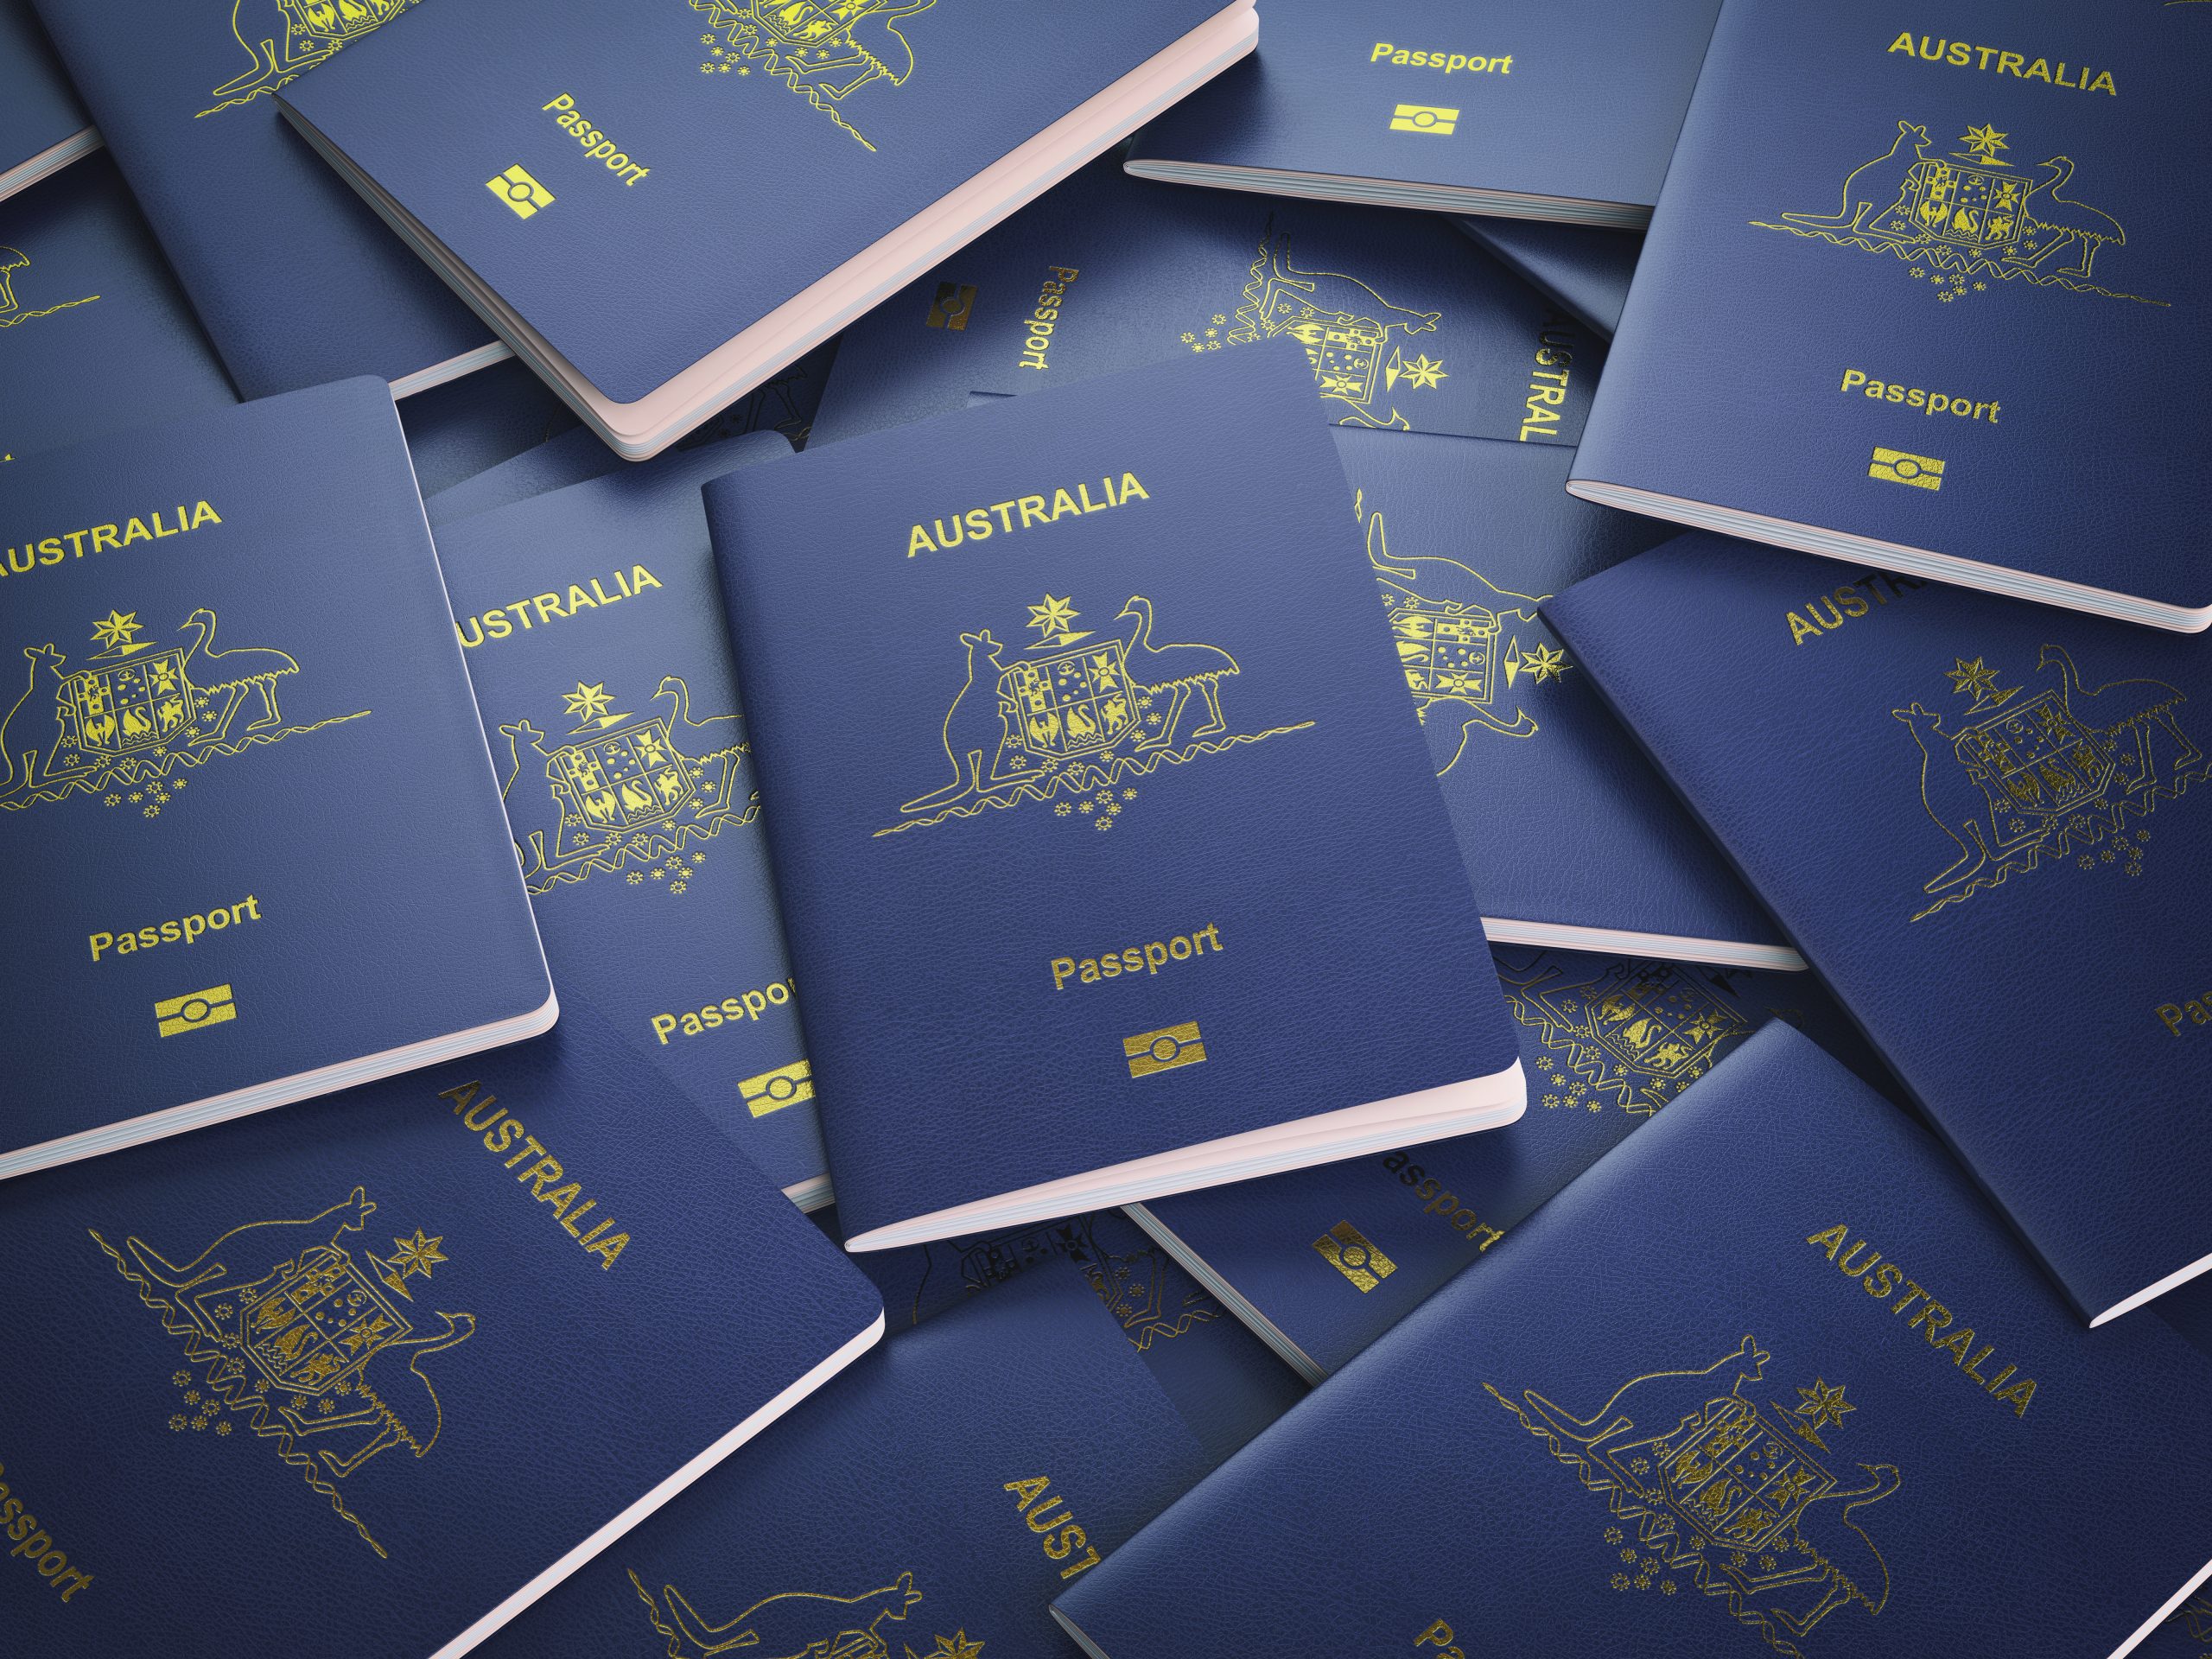 Australian Immigration Planning Levels 2022 – 2023: Understand the updates announced with the new Federal Budget